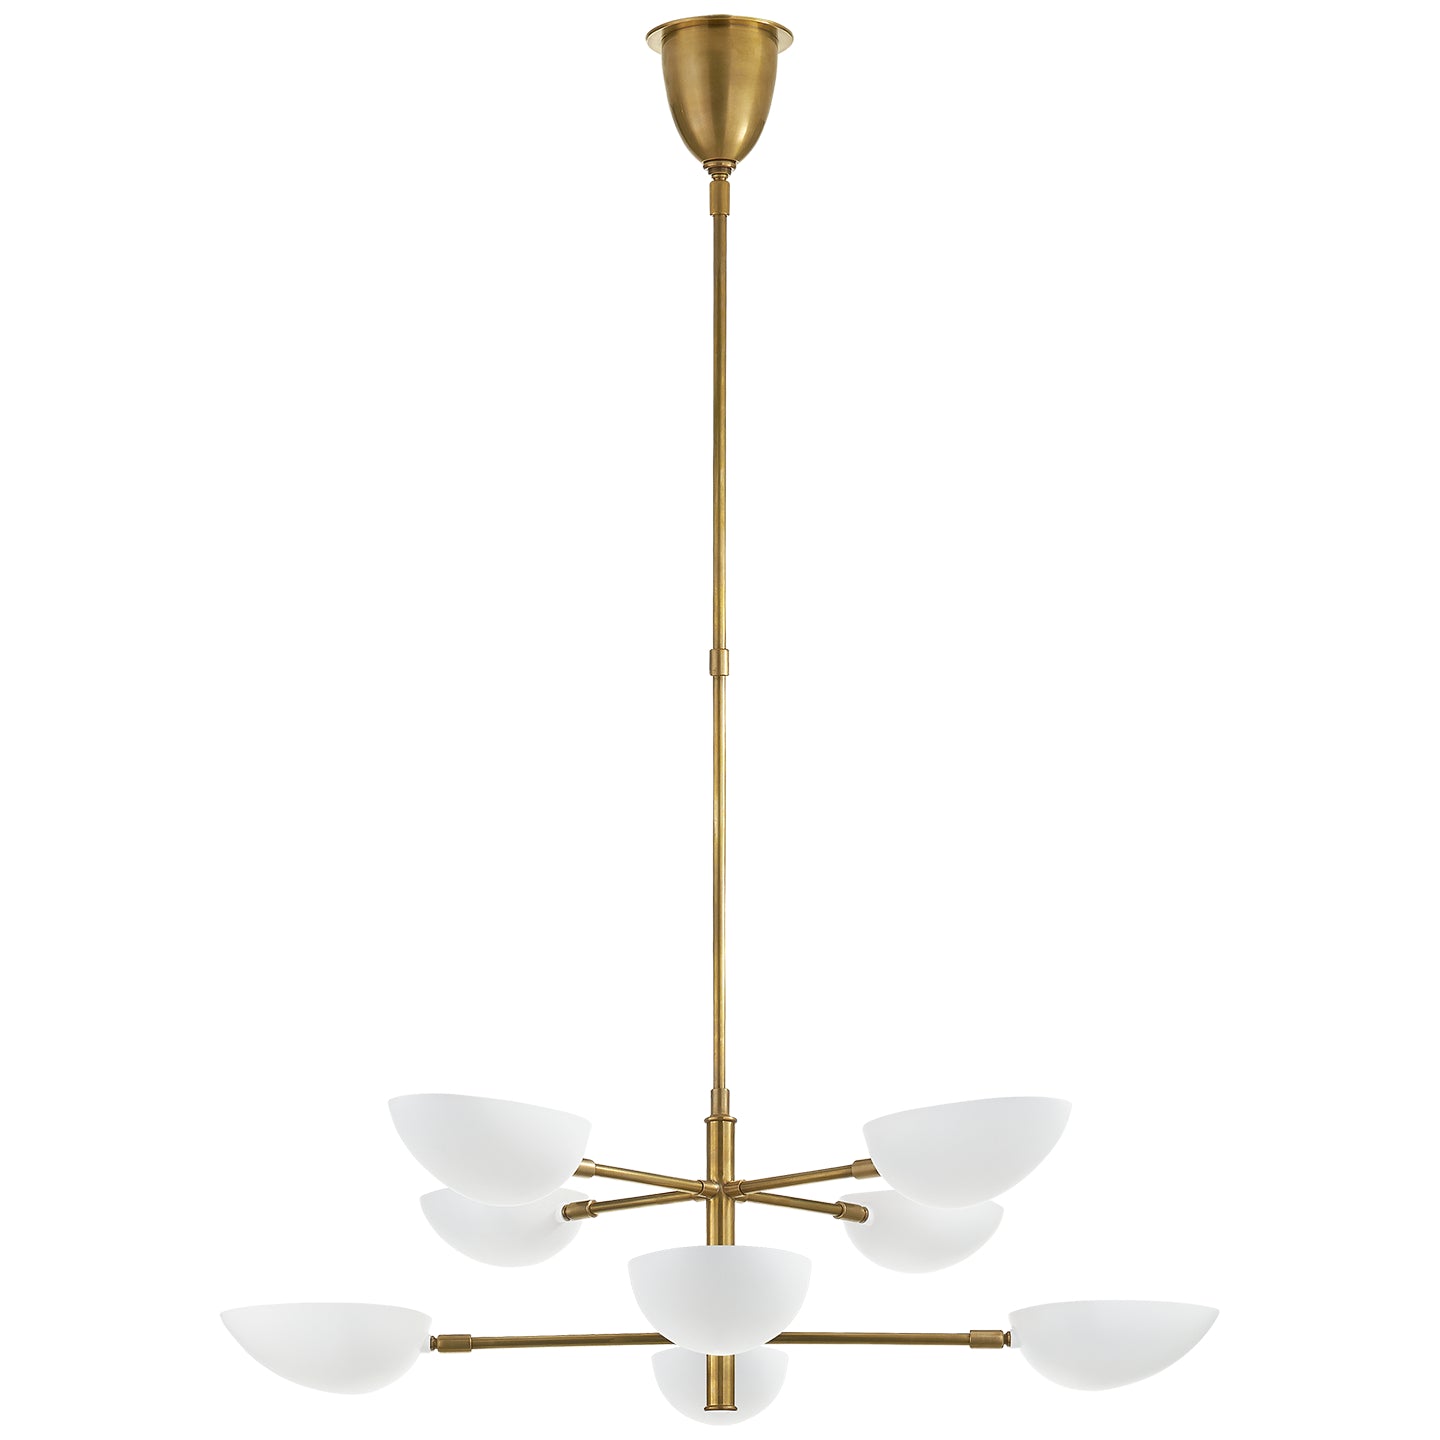 Visual Comfort Signature - ARN 5501HAB-WHT - Eight Light Chandelier - Graphic - Hand-Rubbed Antique Brass